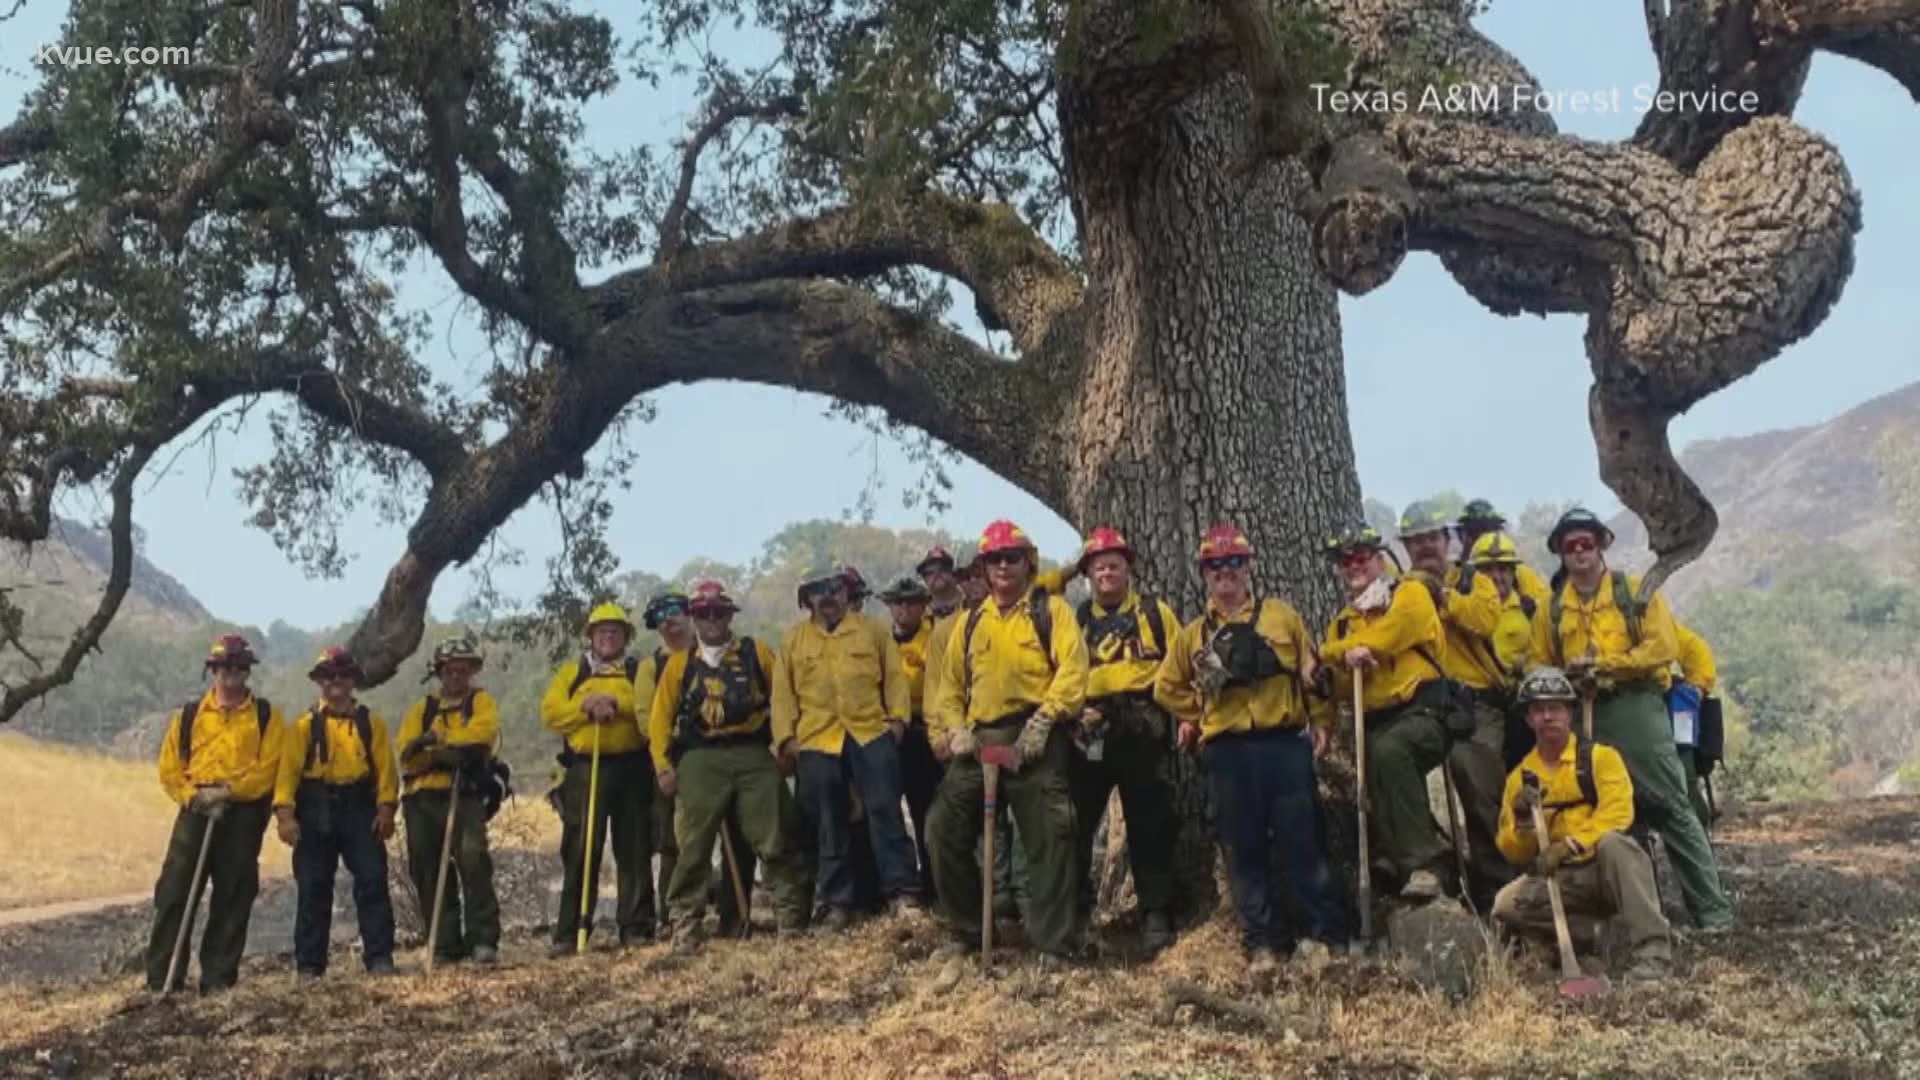 Two hundred Texas firefighters are in California to help battle the 29 wildfires currently burning there. Jenni Lee spoke to one of the task force leaders.